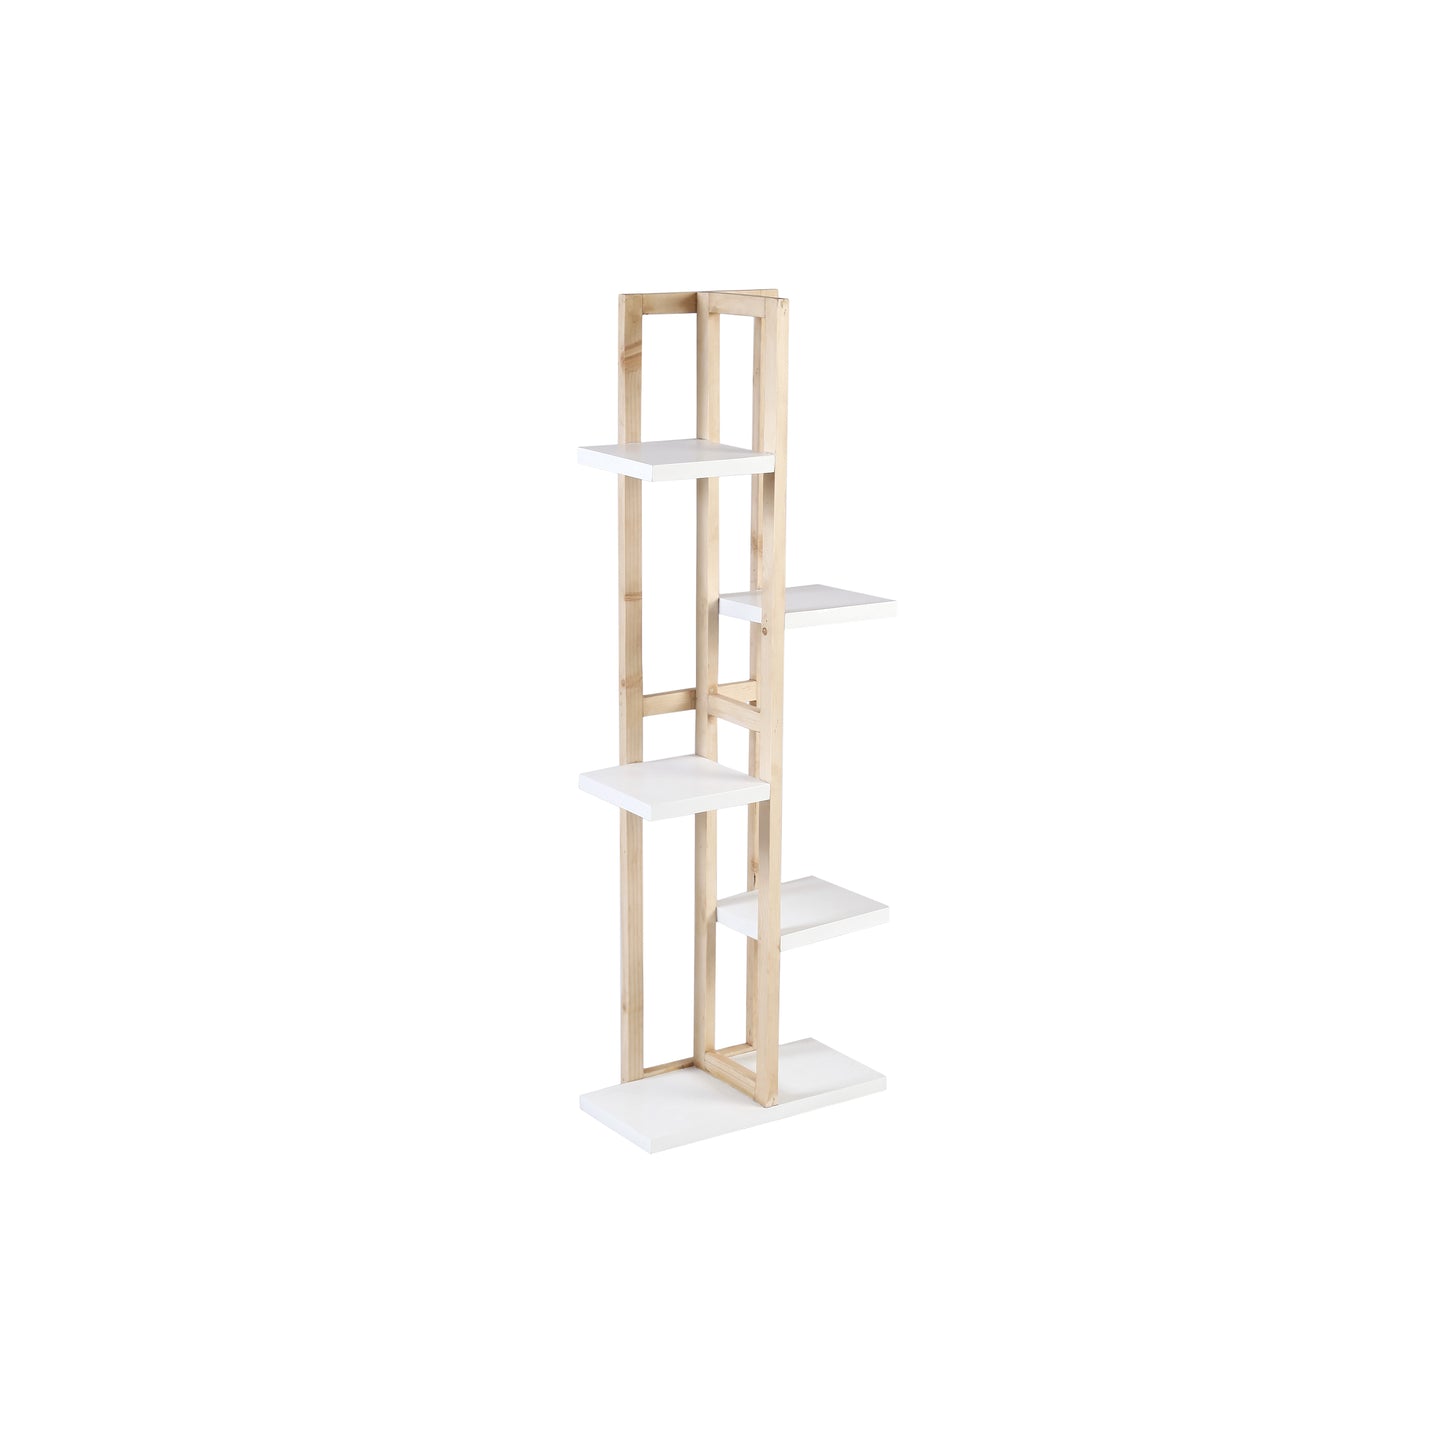 A Tiny MistakeAll Purpose Five Tier Stand (One Piece) (For Planters, Ornaments and Accessories) (Natural Pine Wood Stand with White Planks)